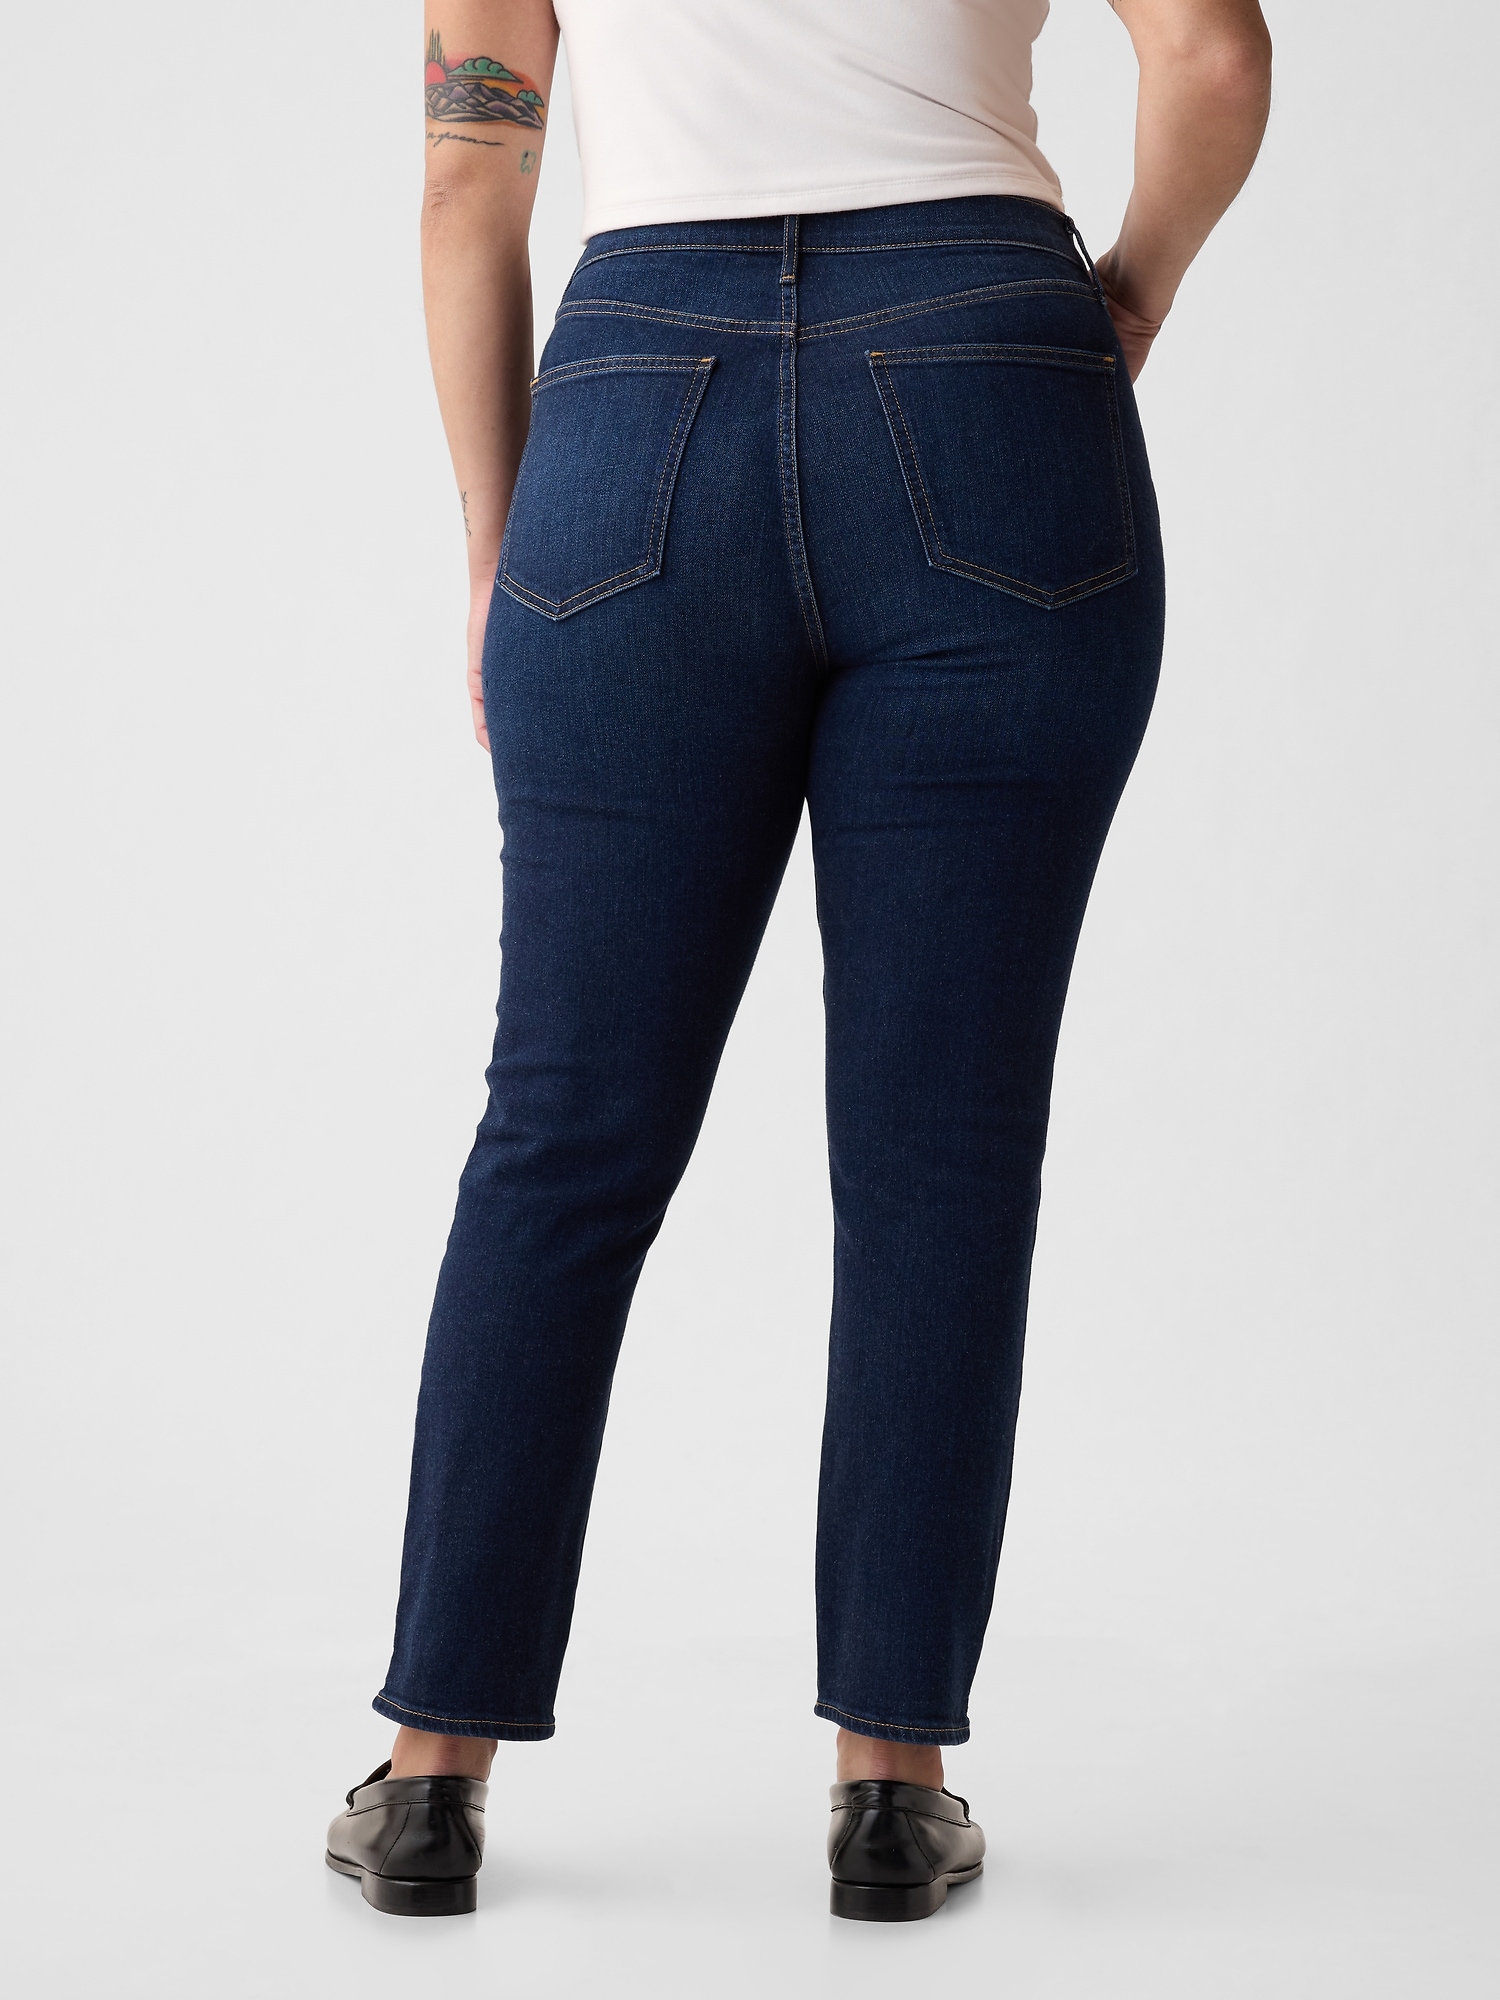 Best Selling And Most Flattering GAP Jeans For Women Over 45! (All